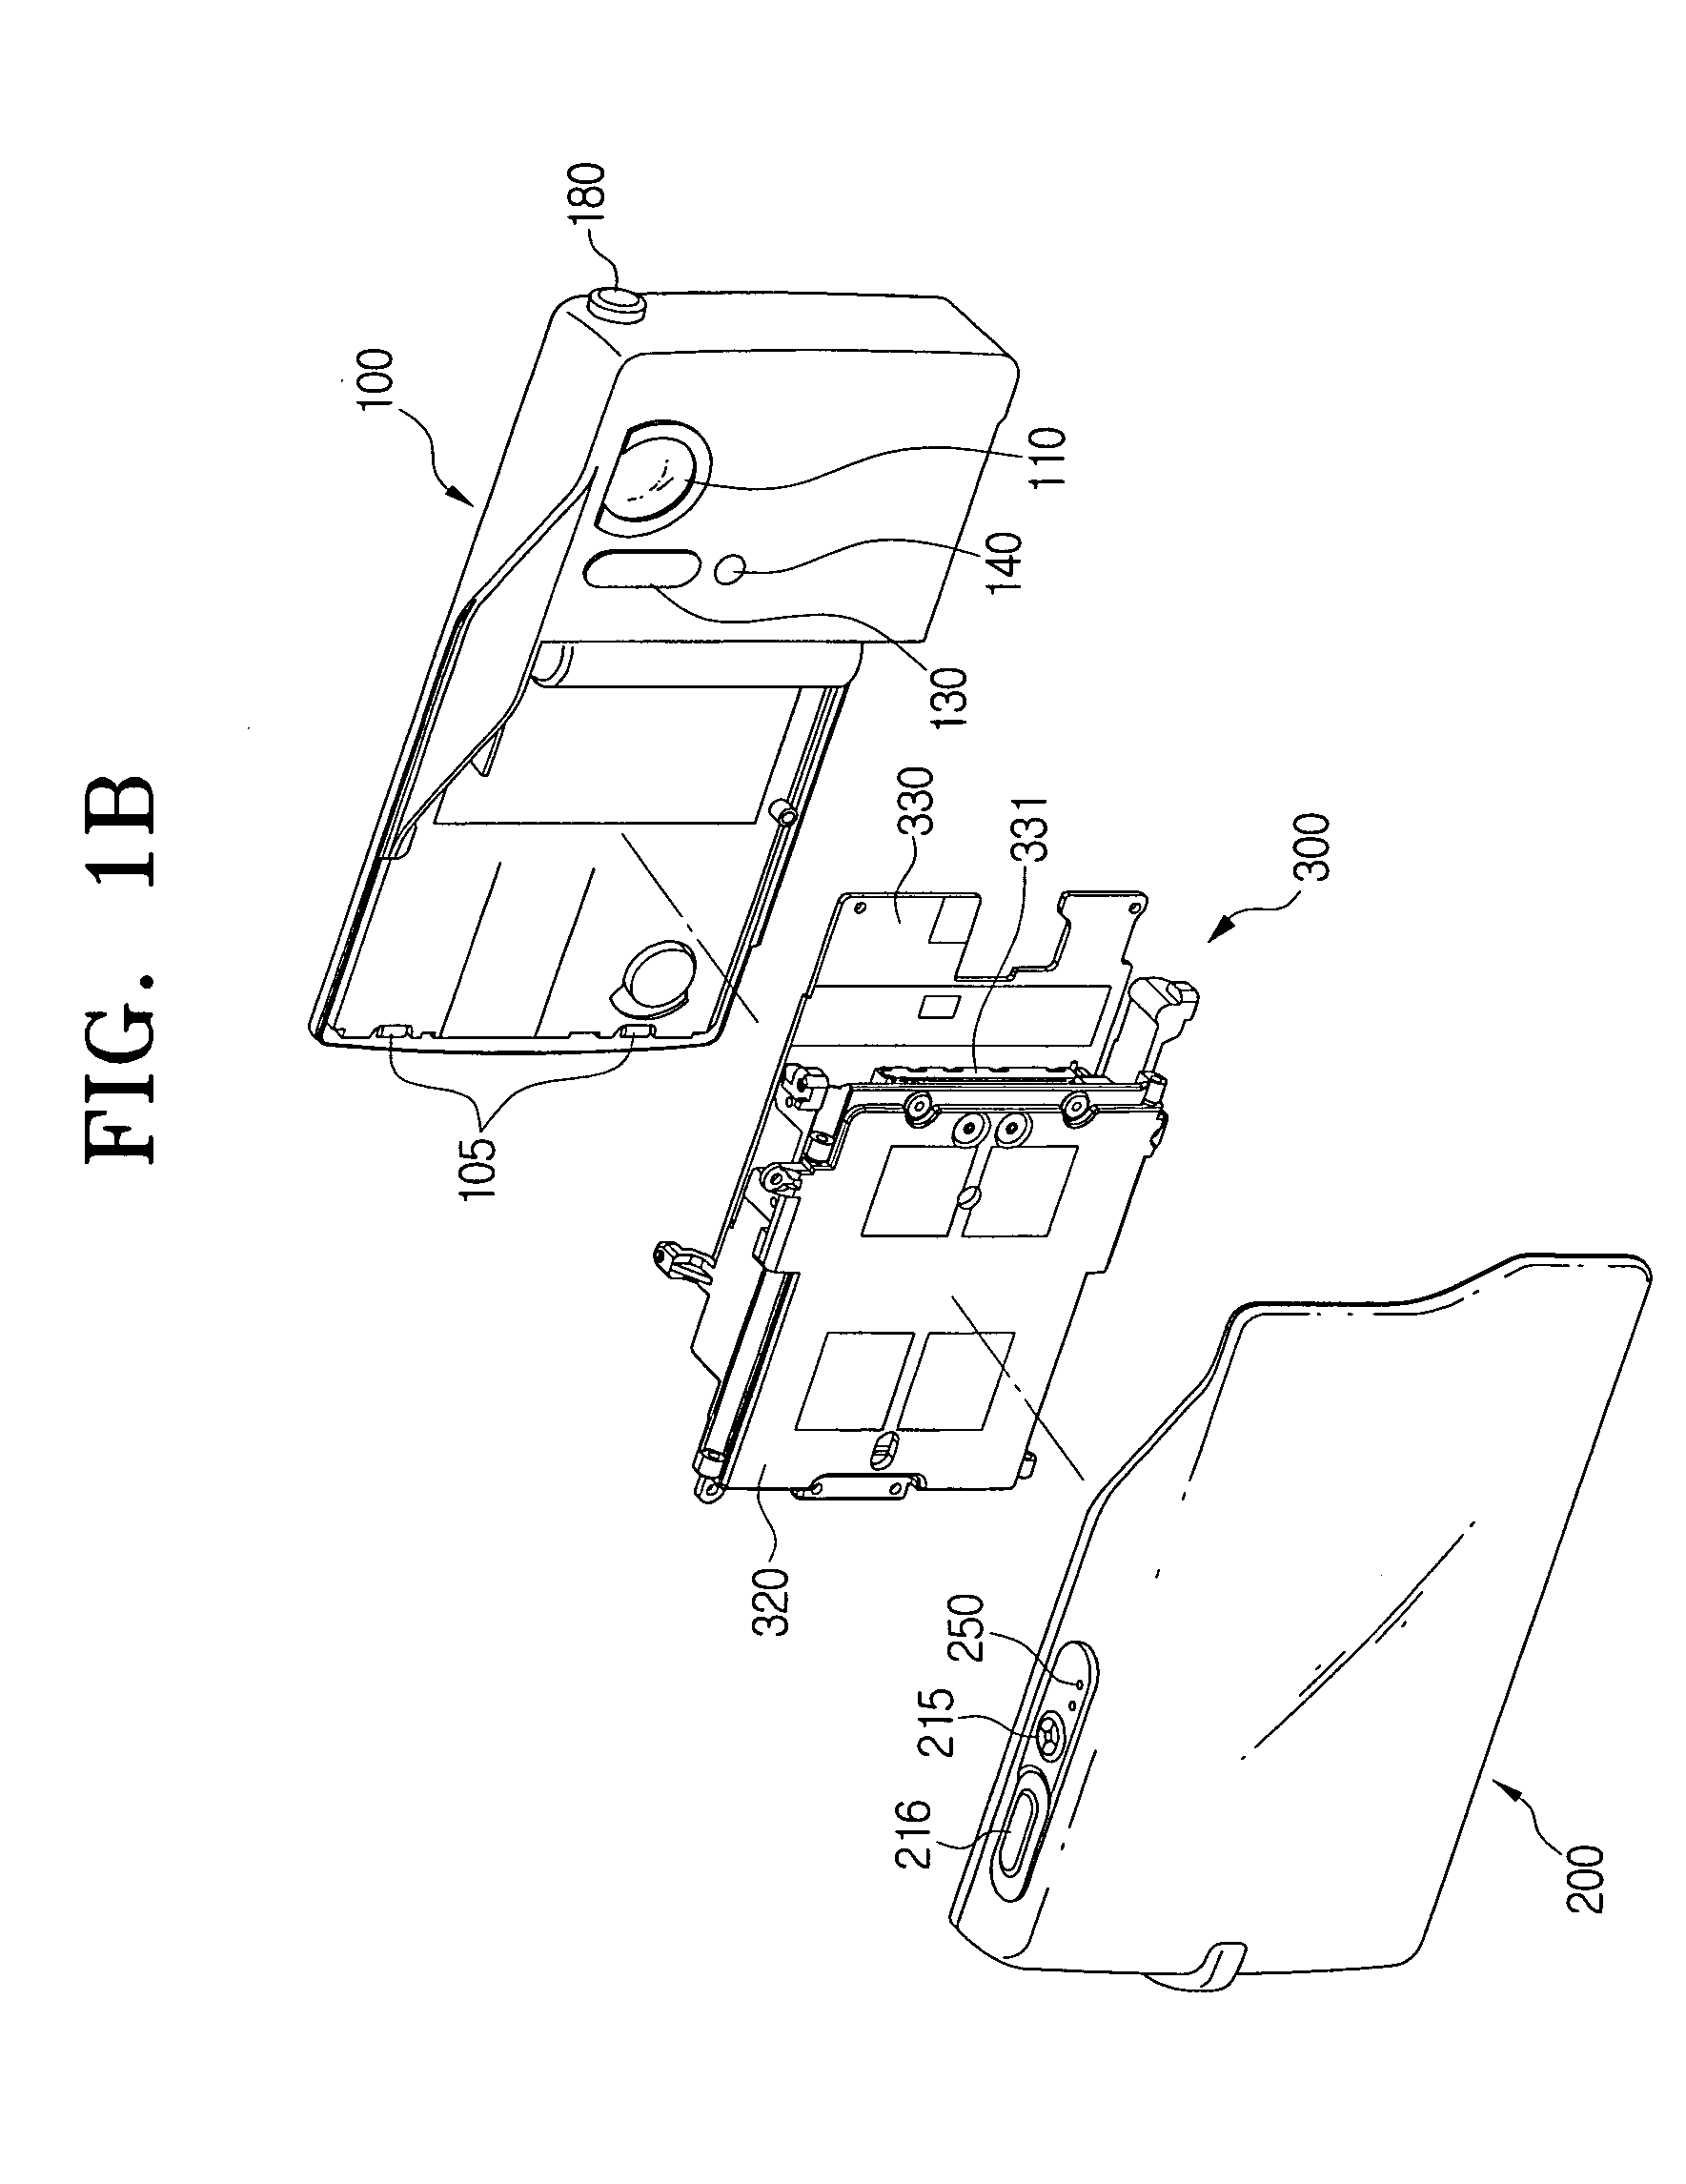 Portable electronic device and camera